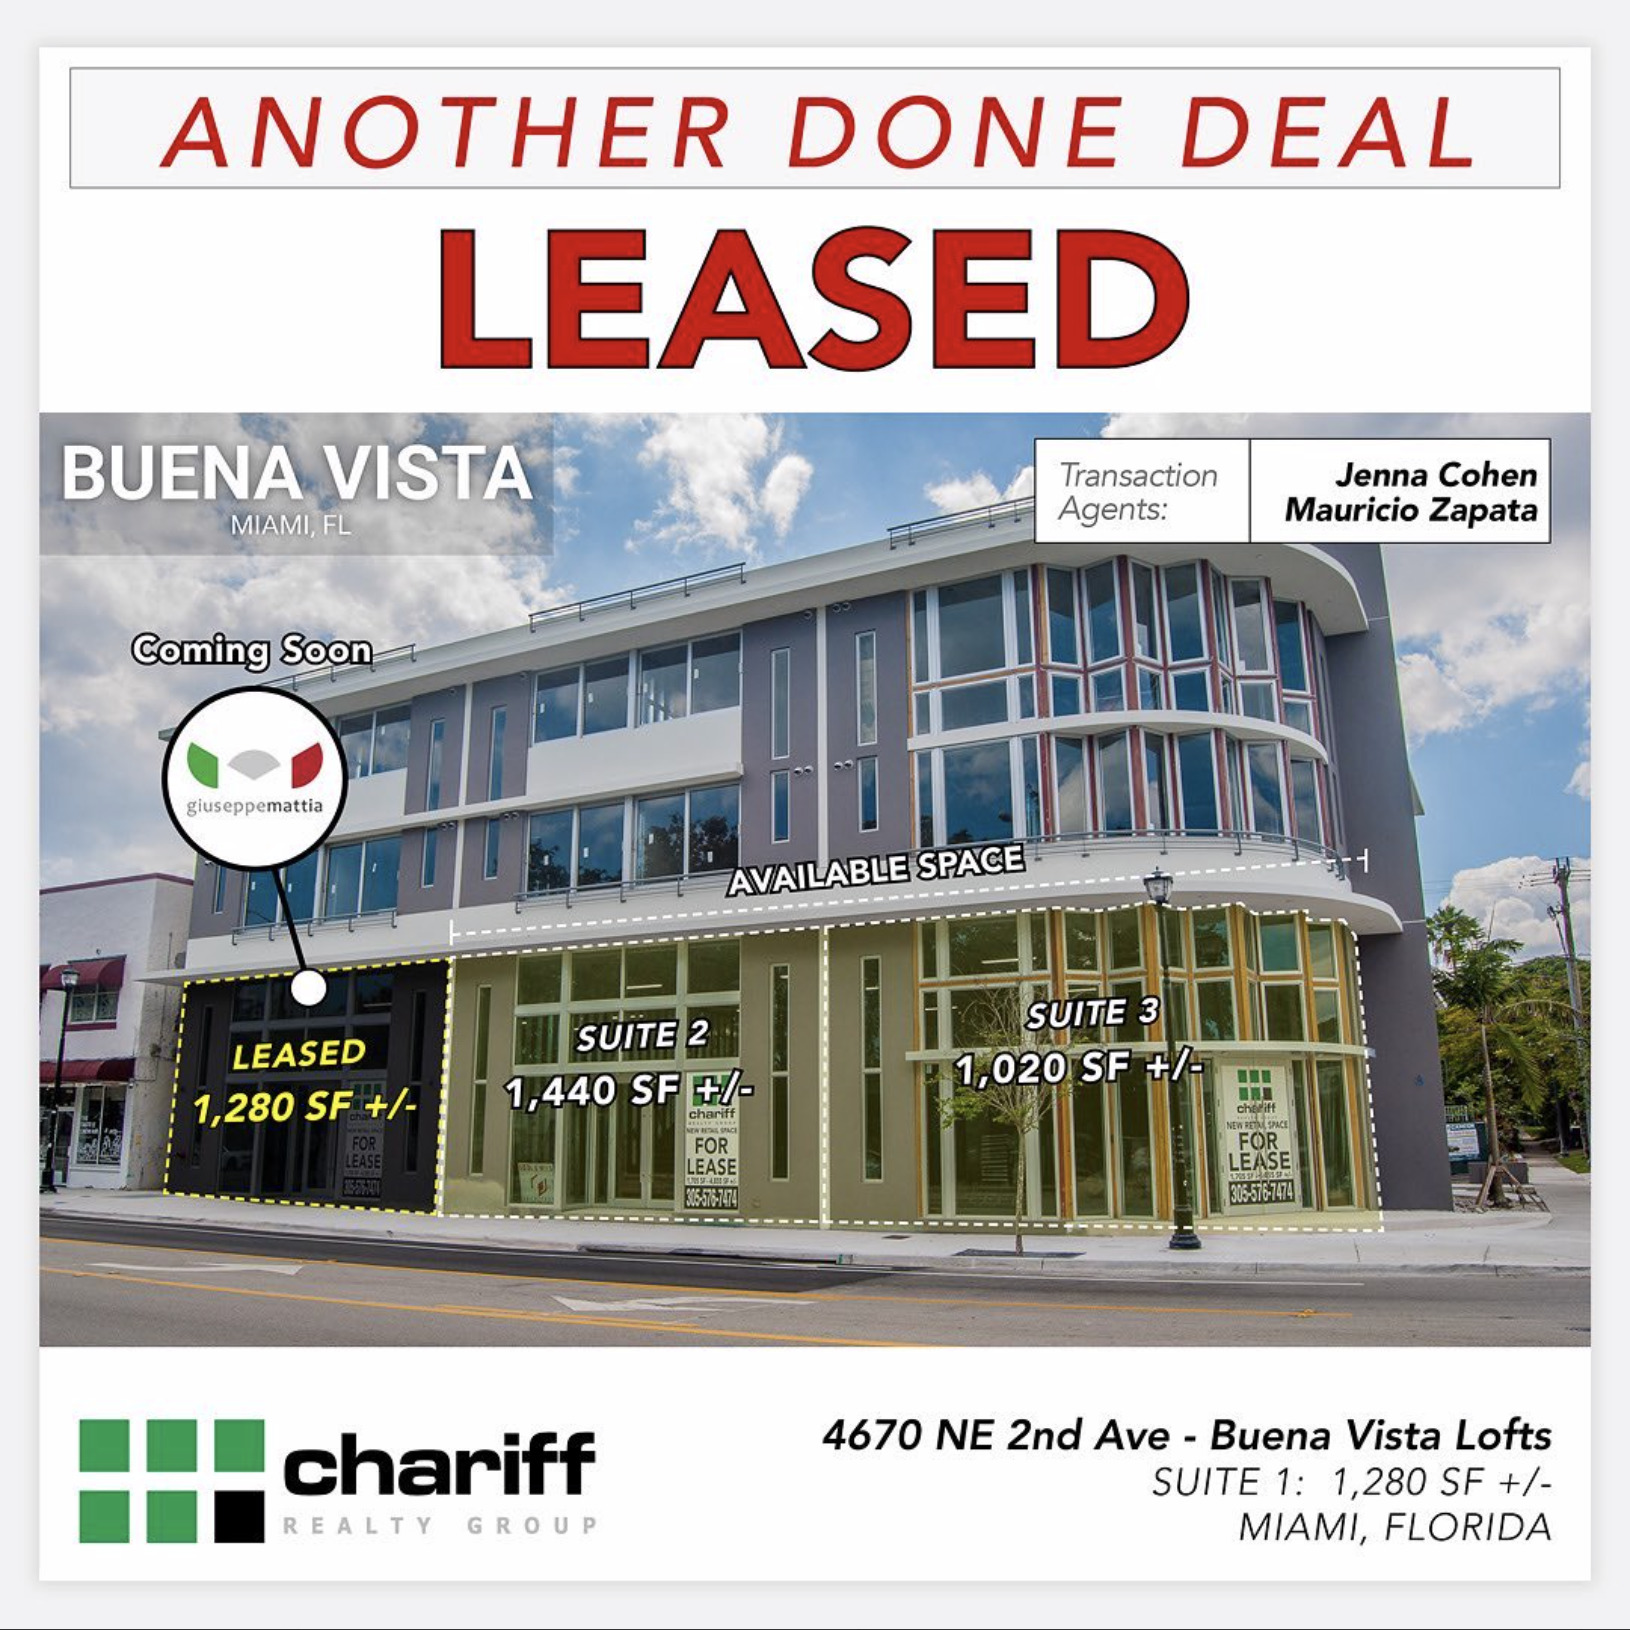 Another Done Deal – LEASED: 4670 NE 2nd Ave - Buena Vista, Miami 33137